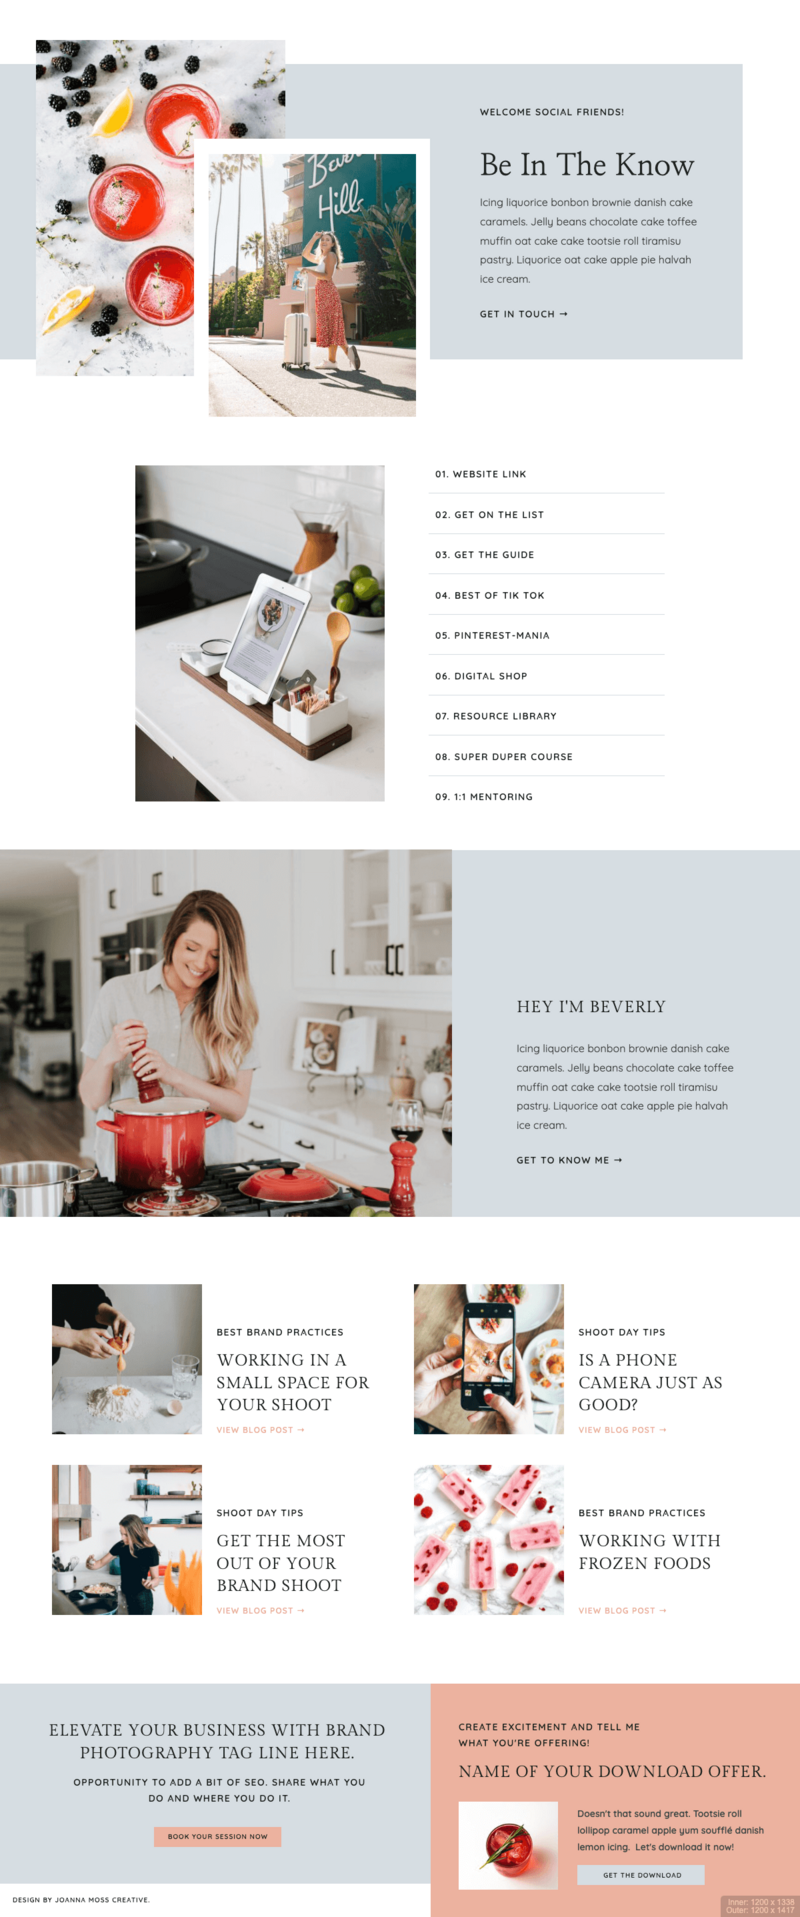 Social Links Page Showit Template